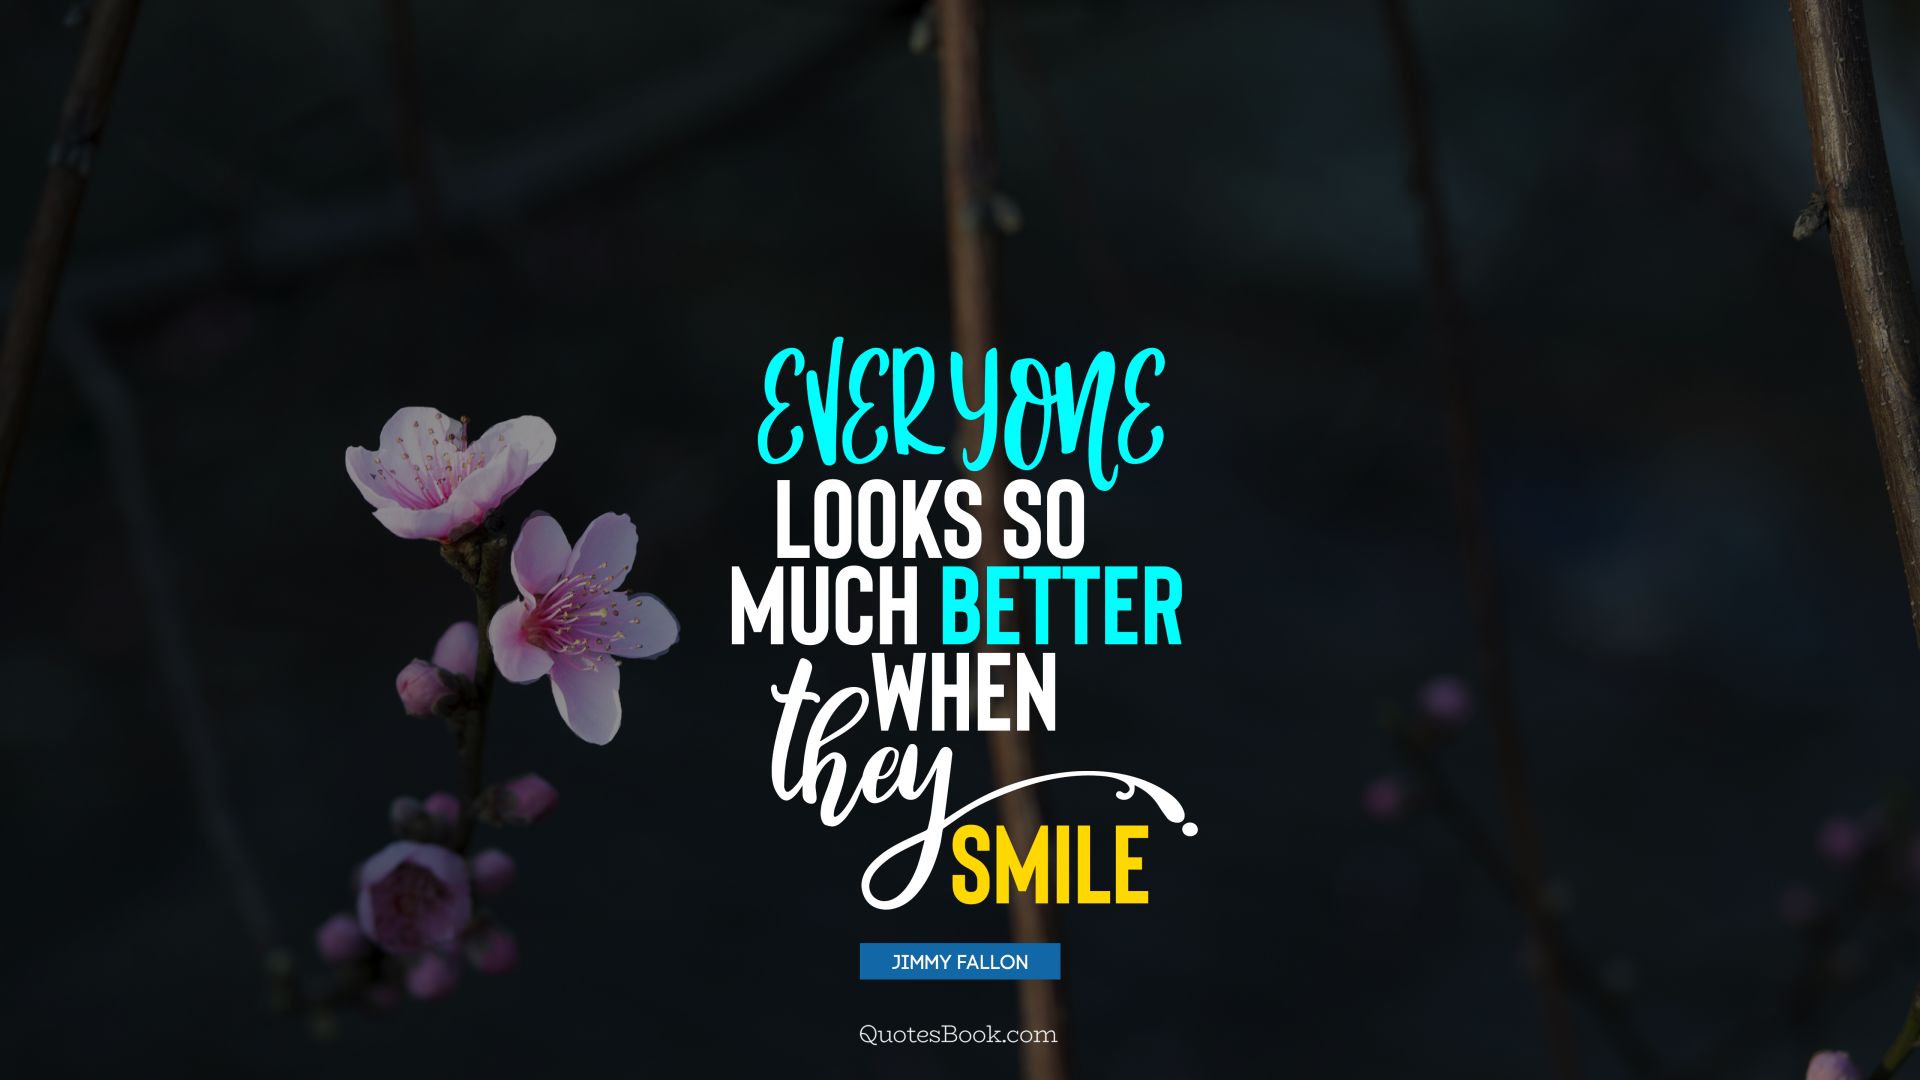 Everyone looks so much better when they smile. - Quote by Jimmy Fallon